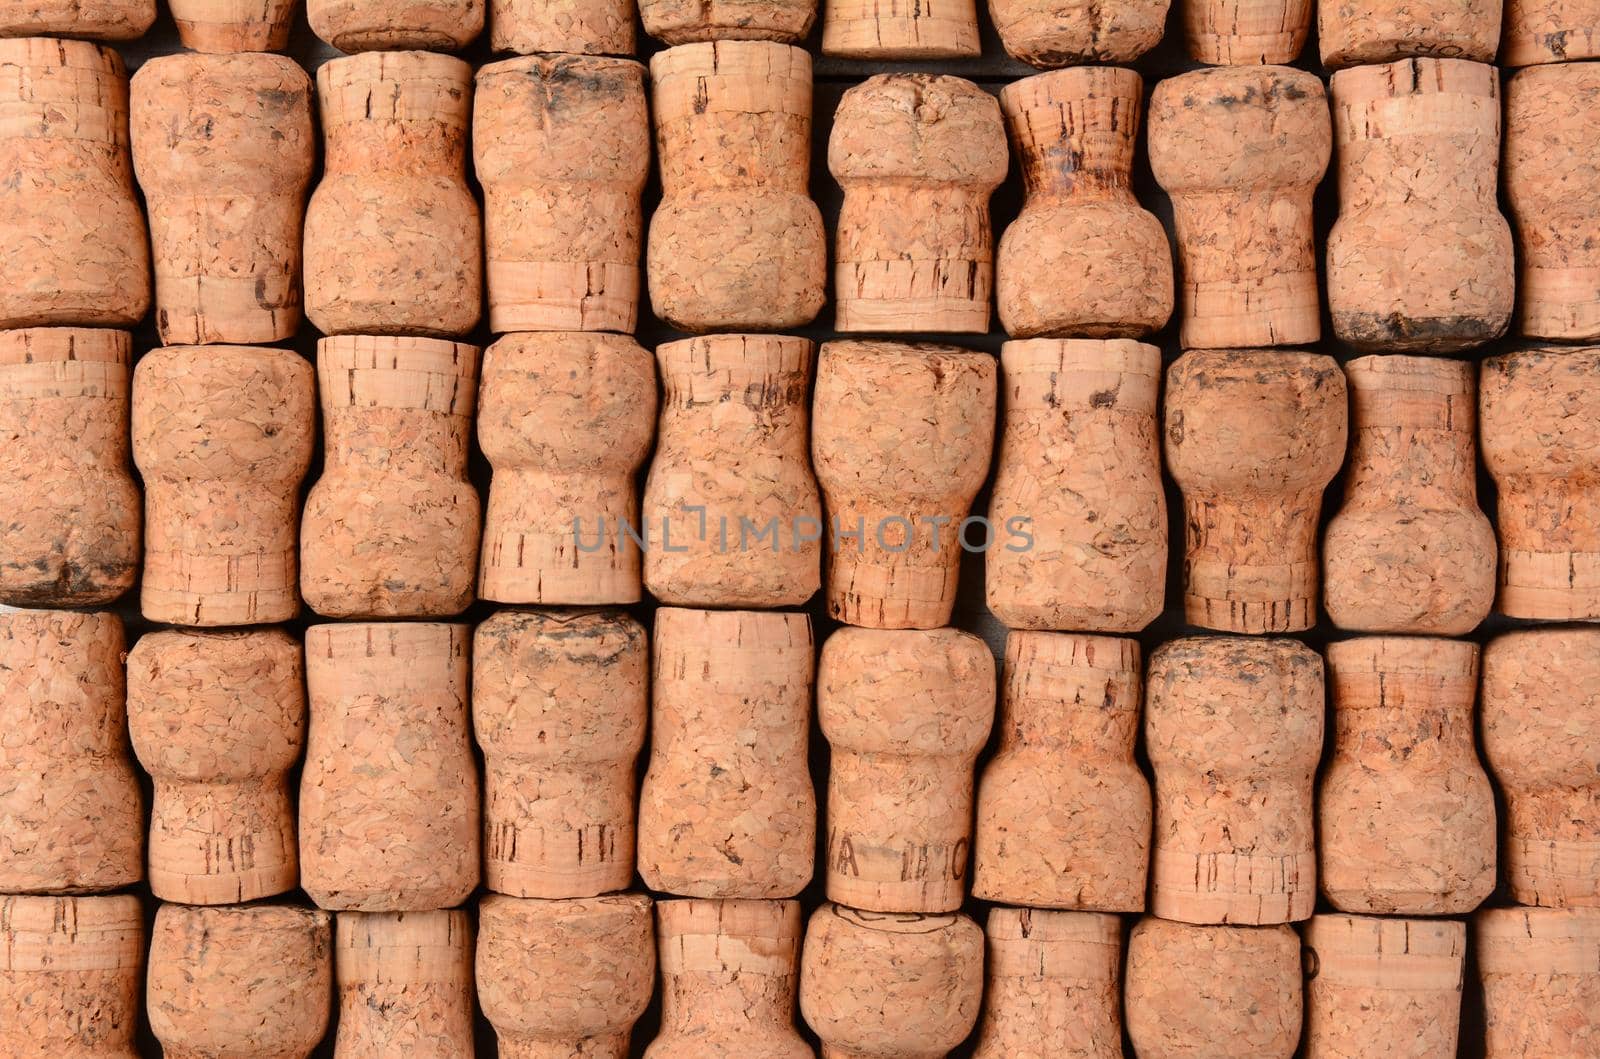 Closeup of a group of Champagne Corks. Horizontal format filling the frame.